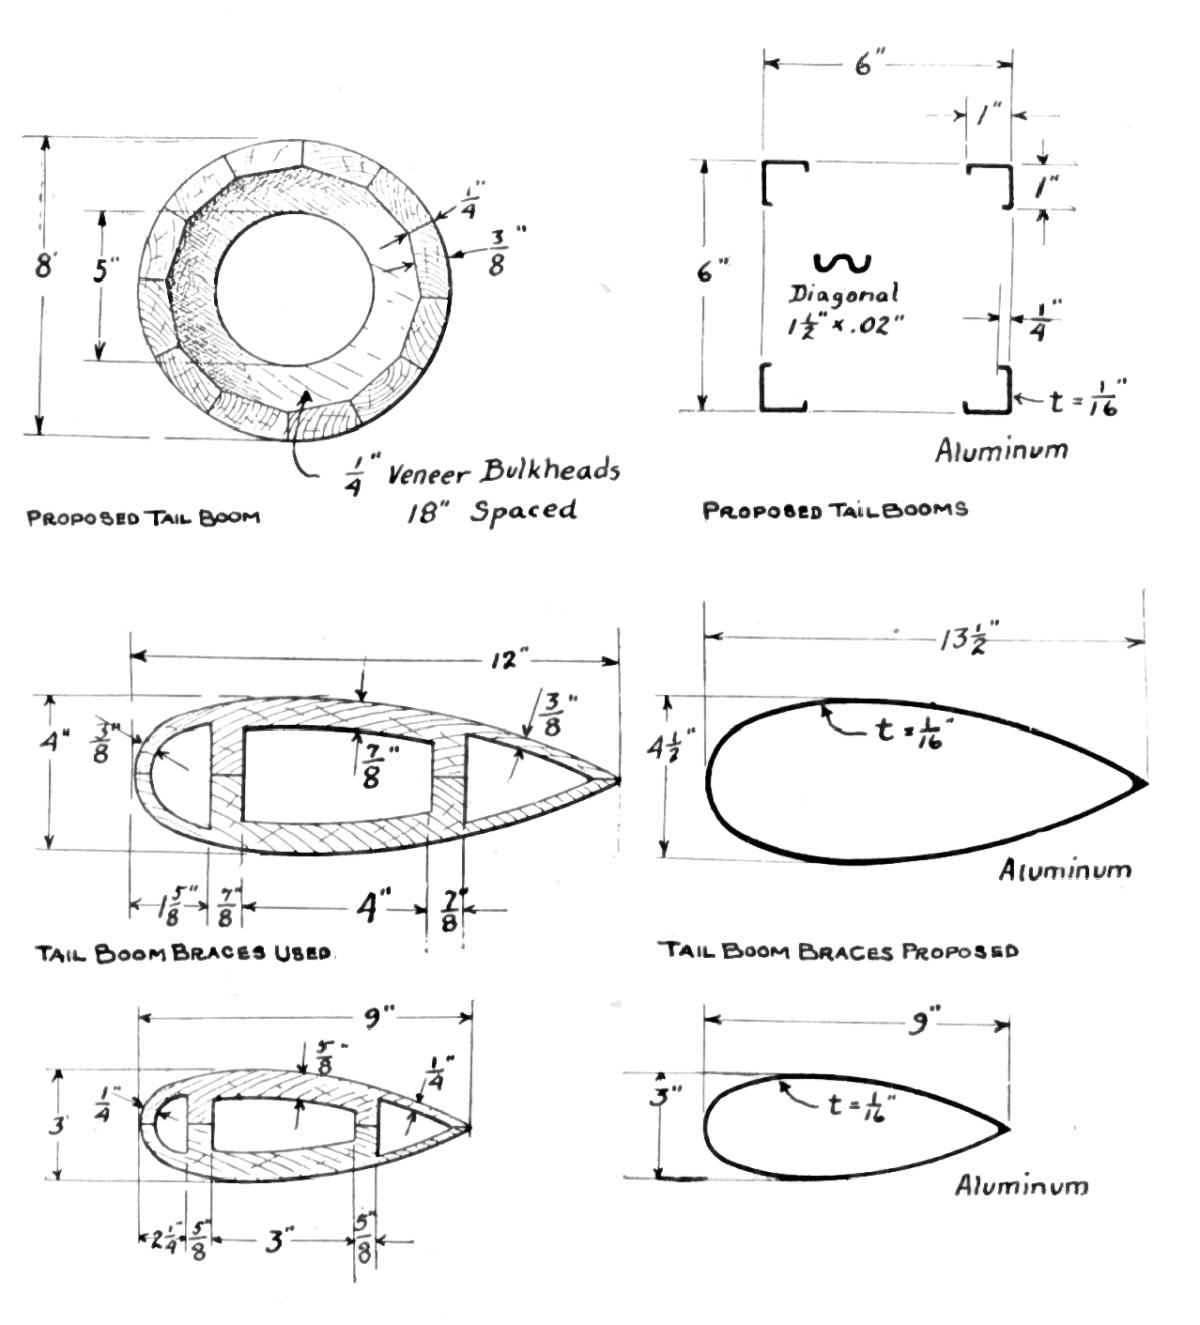 Tailboom cross sections of NC Flying Boat